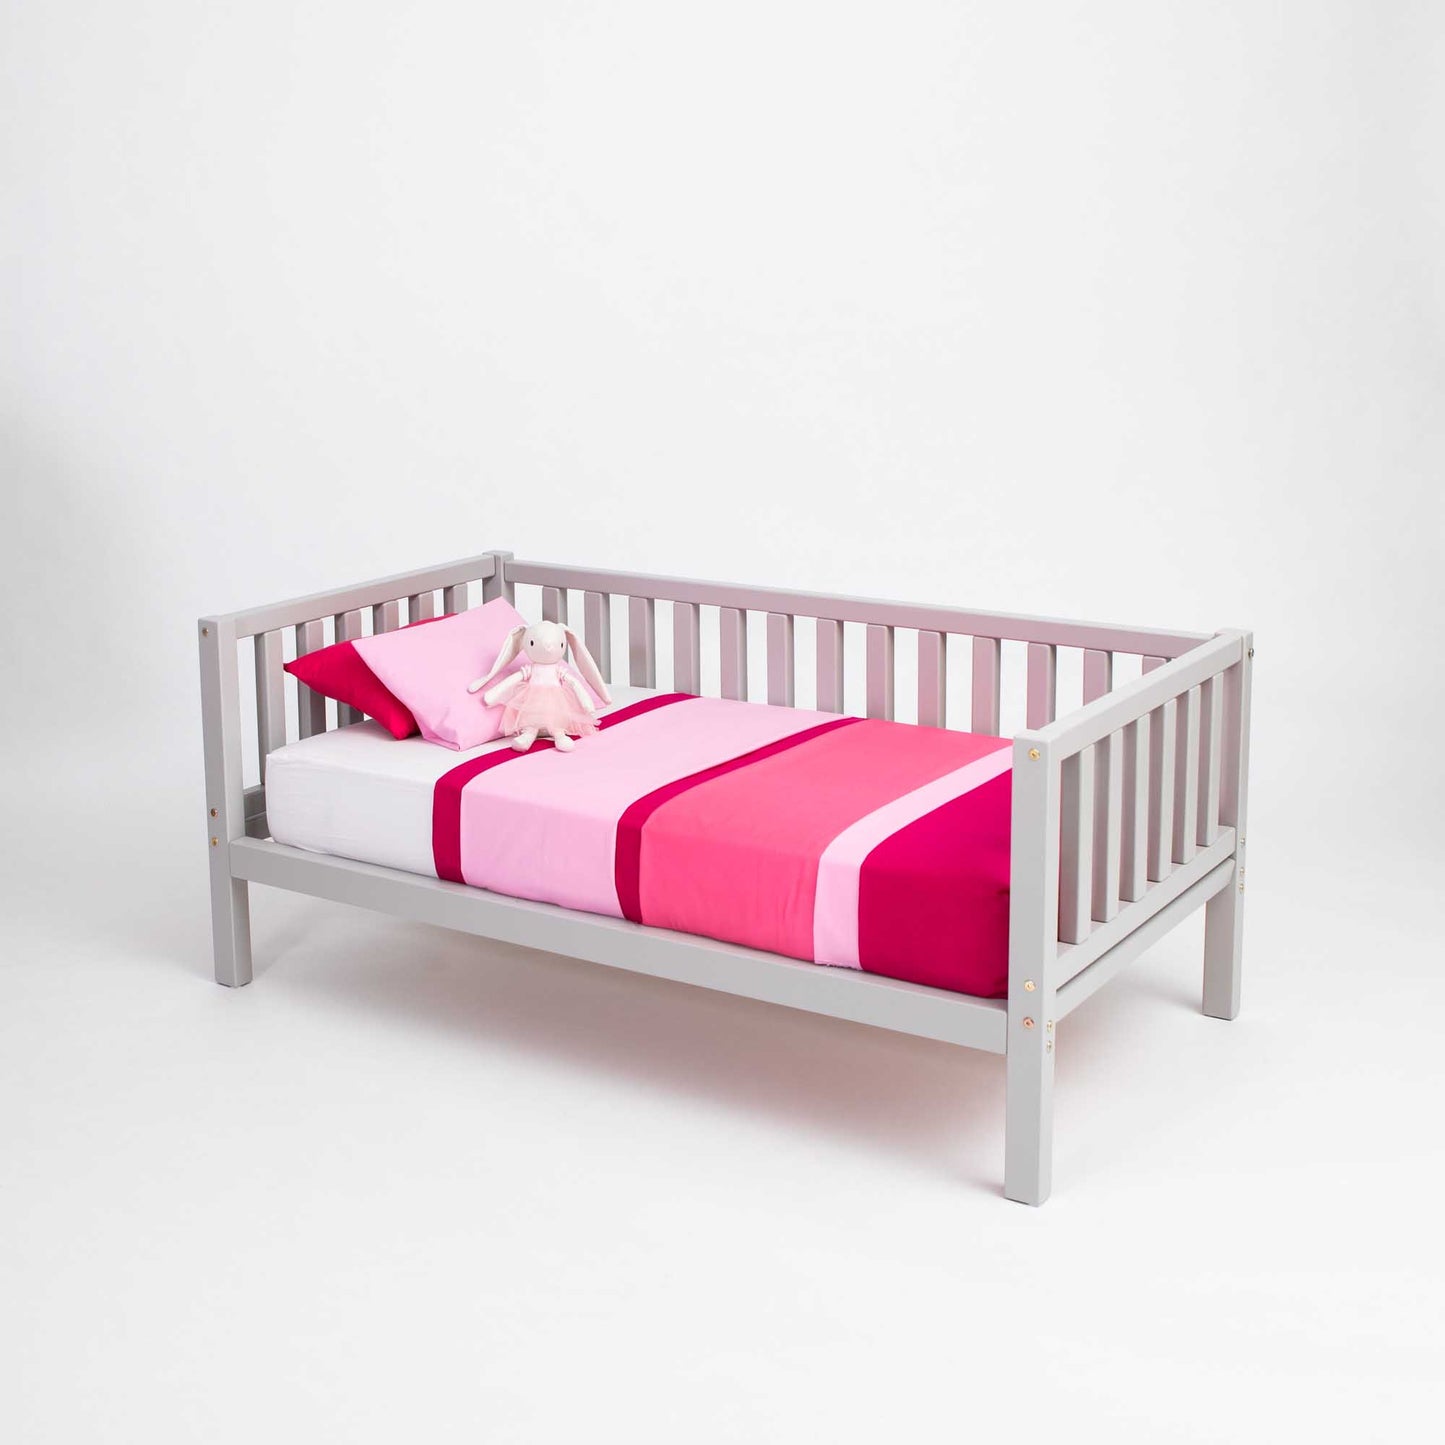 A Sweet Home From Wood 2-in-1 toddler bed on legs with a 3-sided vertical rail, with pink and white bedding, placed at floor level.